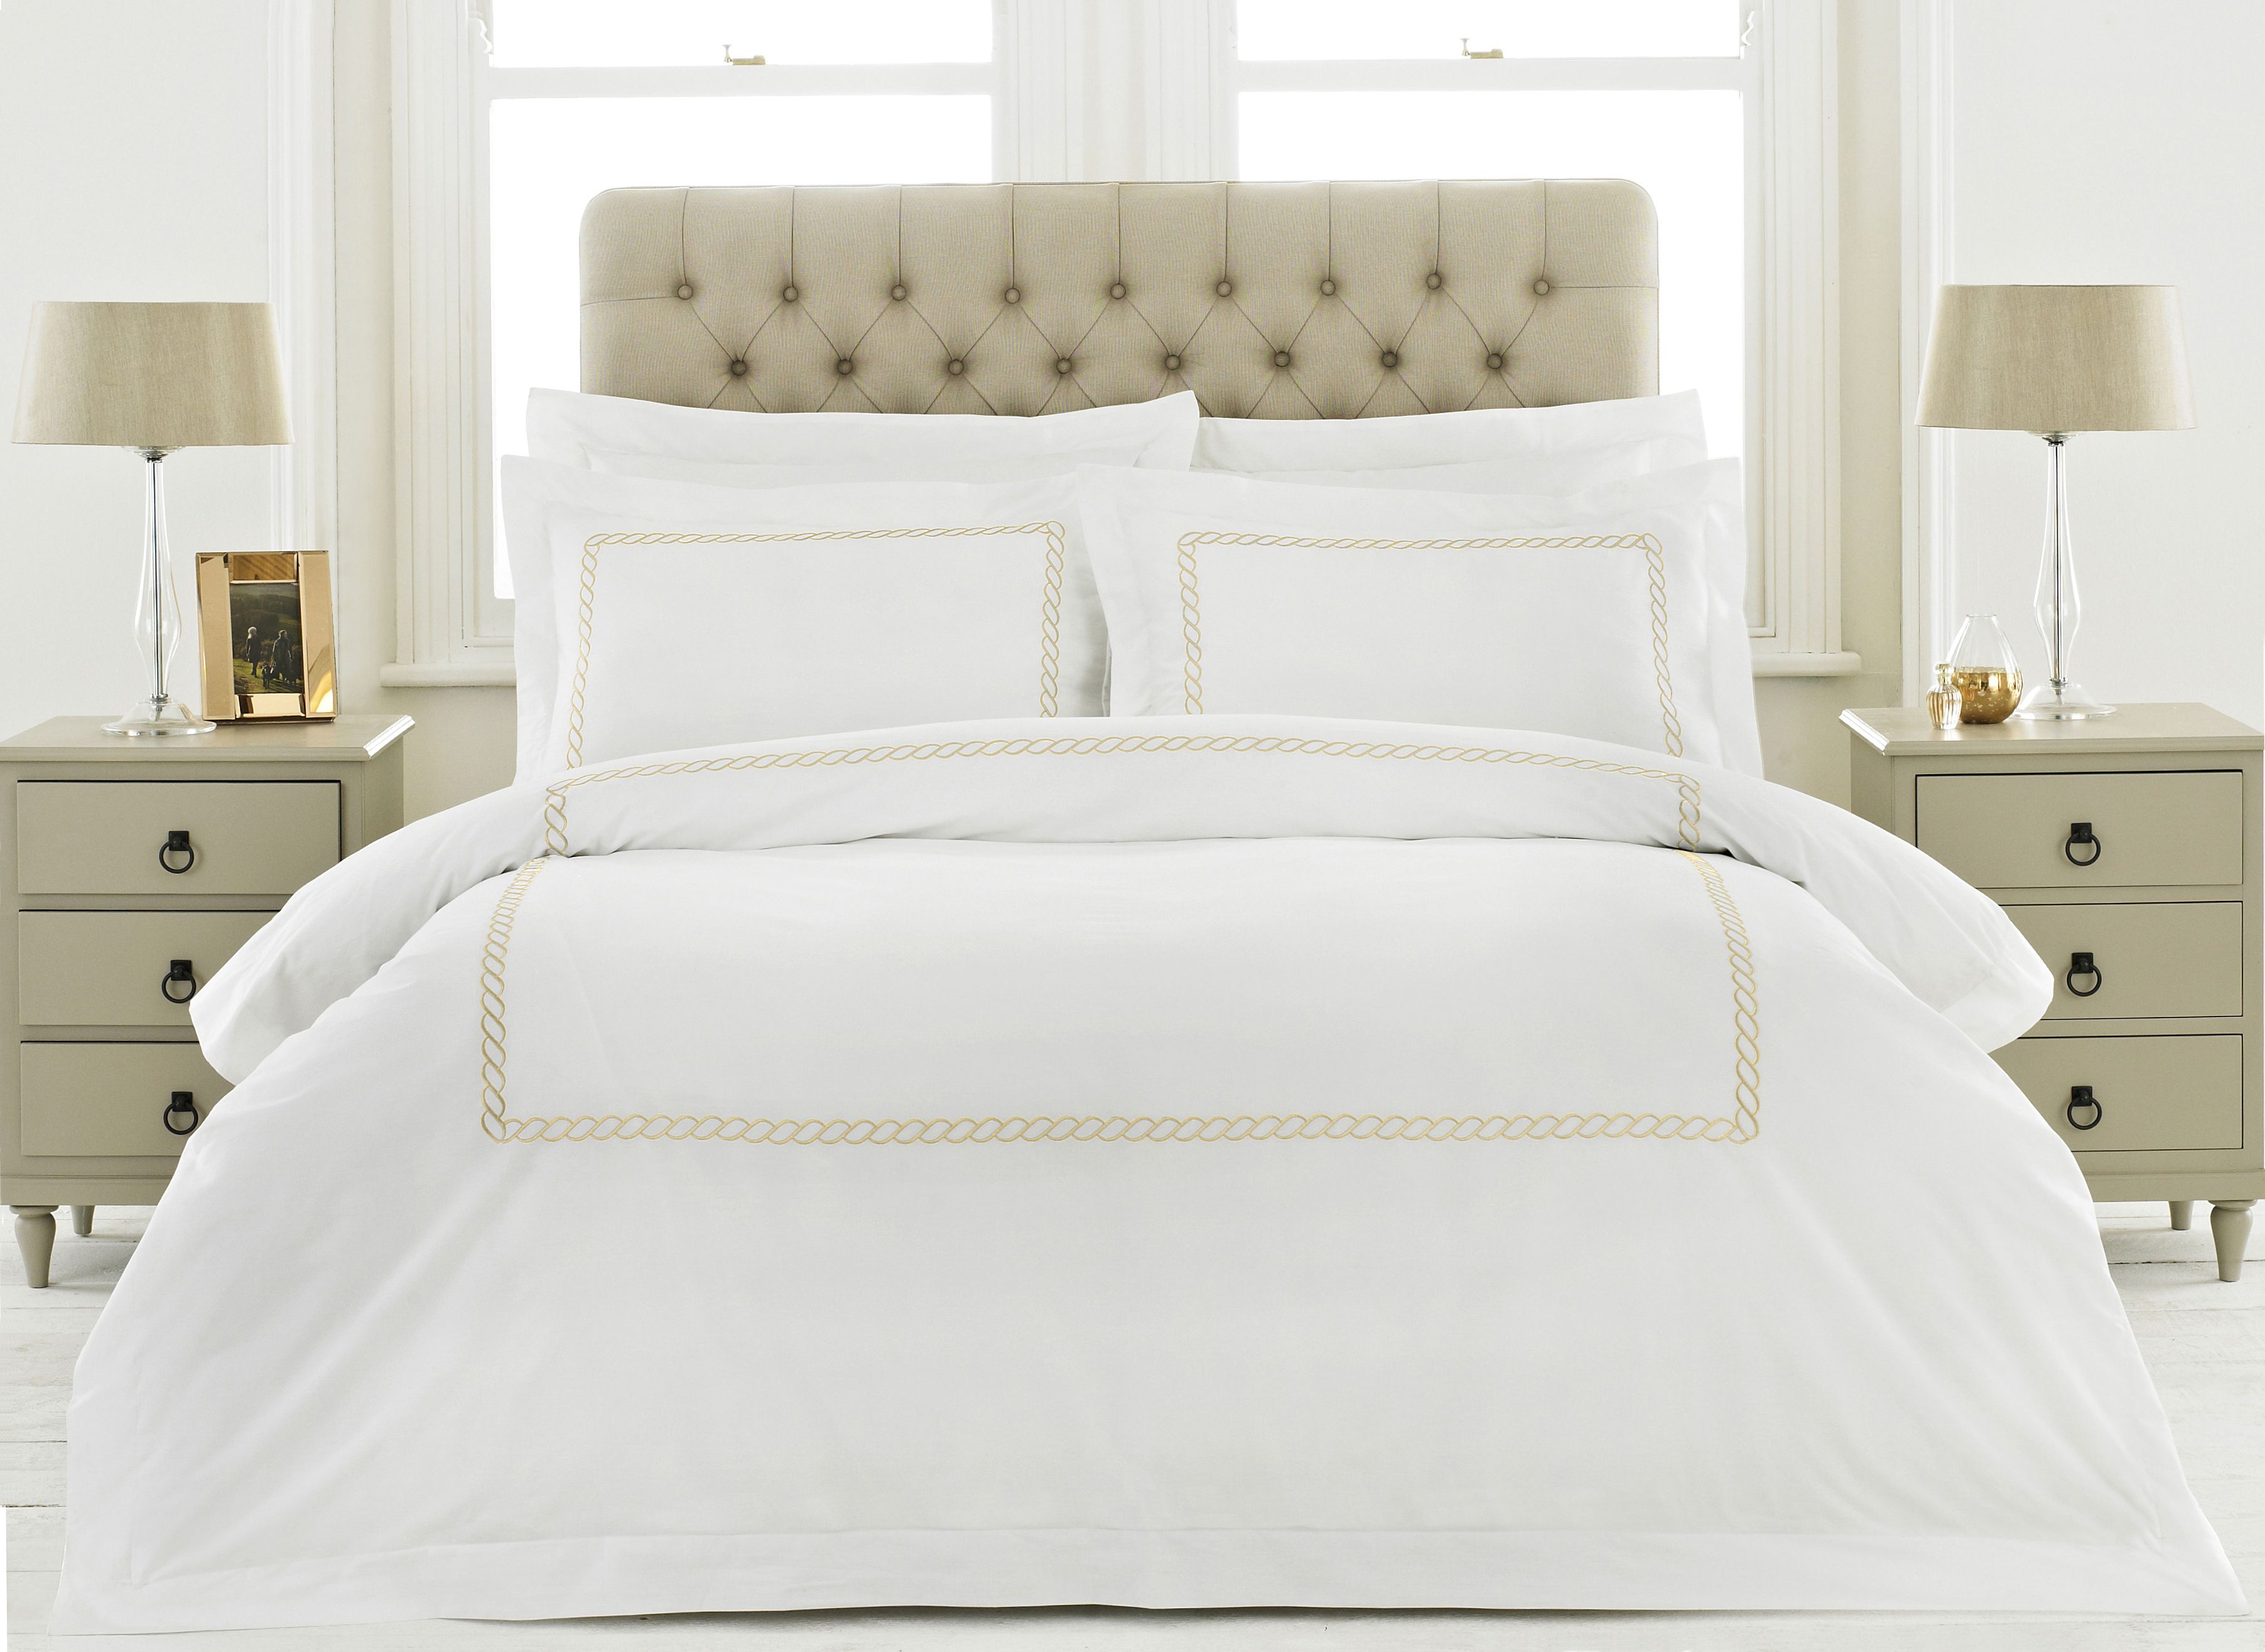 Created from the very finest pure cotton, the Paoletti Cleopatra duvet sets are unashamedly luxurious. Designed for some of the most luxurious boutique 5-star hotels, give your bed a treat and prepare for the best nights sleep of your life. Featuring premium rope embroidery and a luxurious oxford border it's an ideal match for most bedrooms. This duvet set includes a hotel-quality duvet cover and one fully matching pillowcase. The Cleopatra duvet and pillow case set is easy to care for as it is fully machine washable at 40 degrees and is iron appropriate.